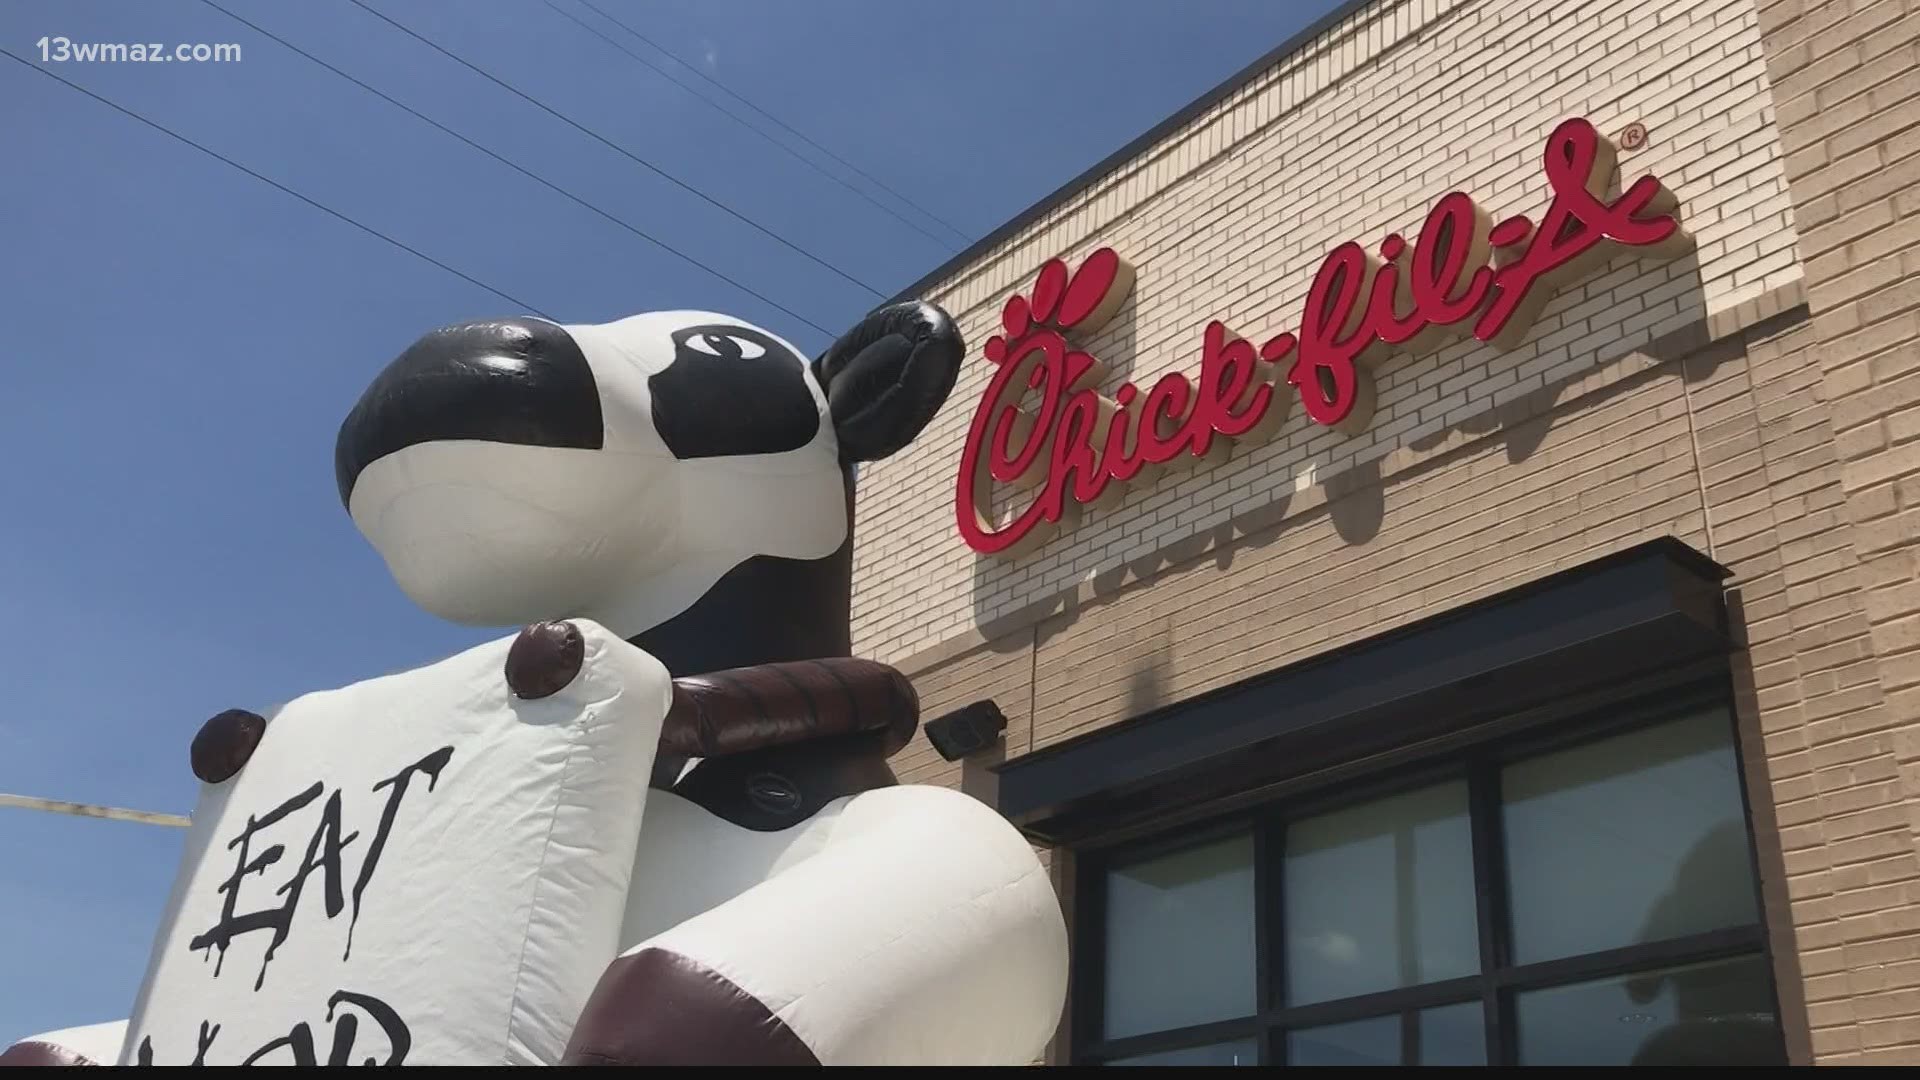 Back in January of 2020, a spokesperson for Chick-fil-A Inc. said that the Chick-fil-A location on Tom Hill Sr. Boulevard would be closing in 2020 for remodeling